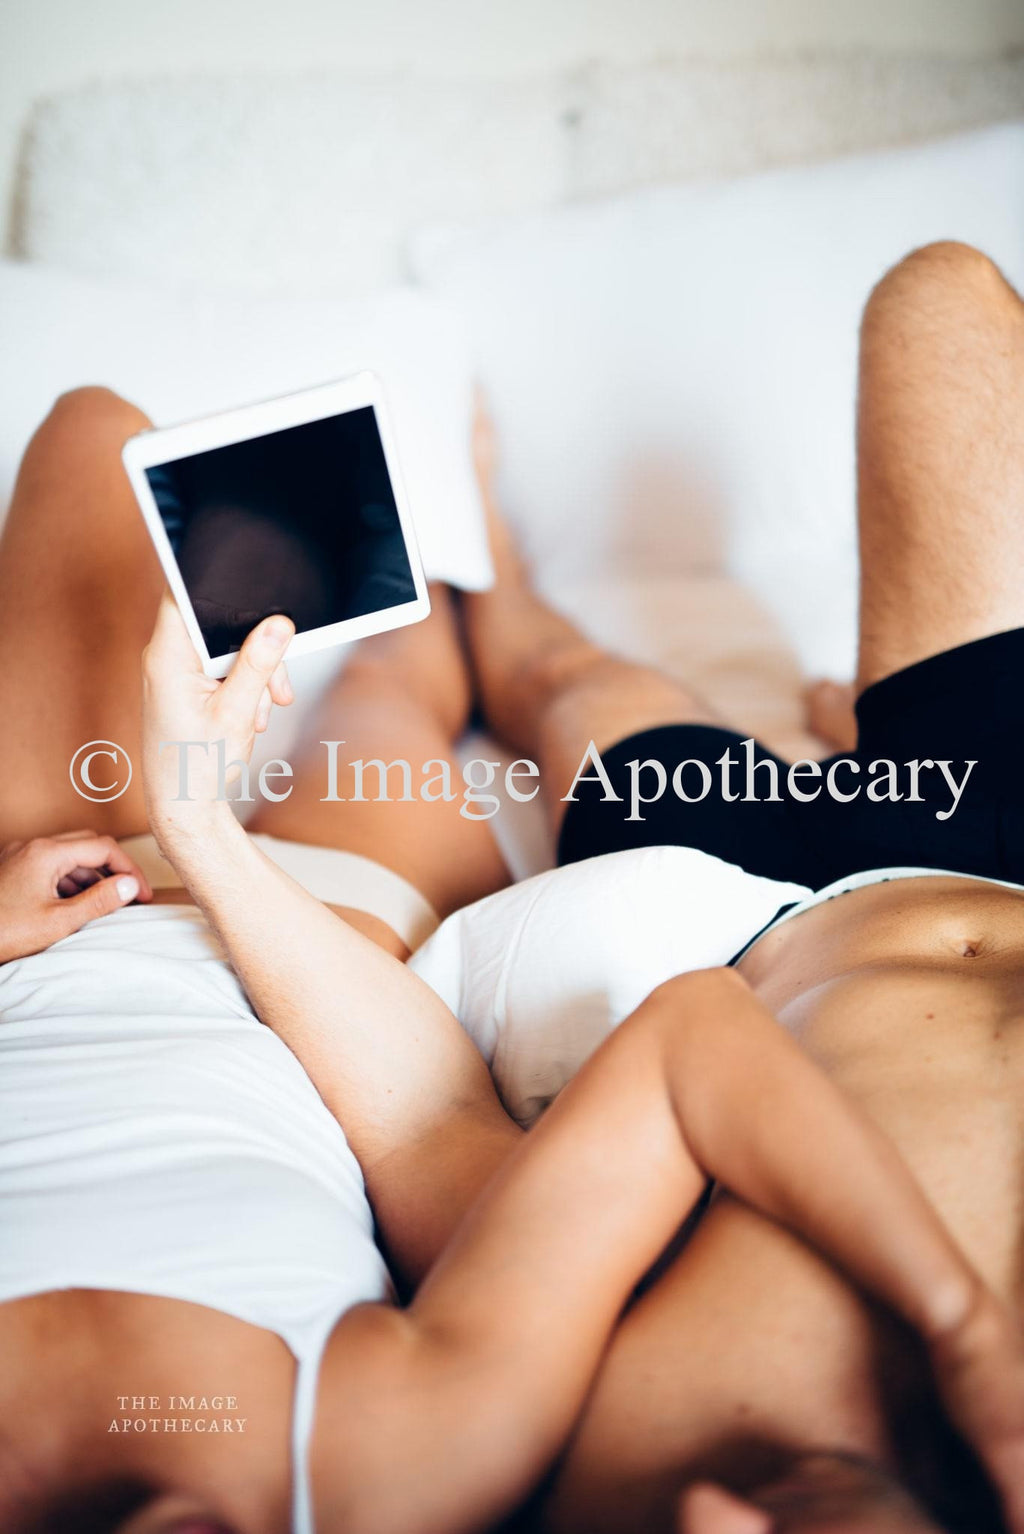 TheImageApothecary-27MO - Stock Photography by The Image Apothecary